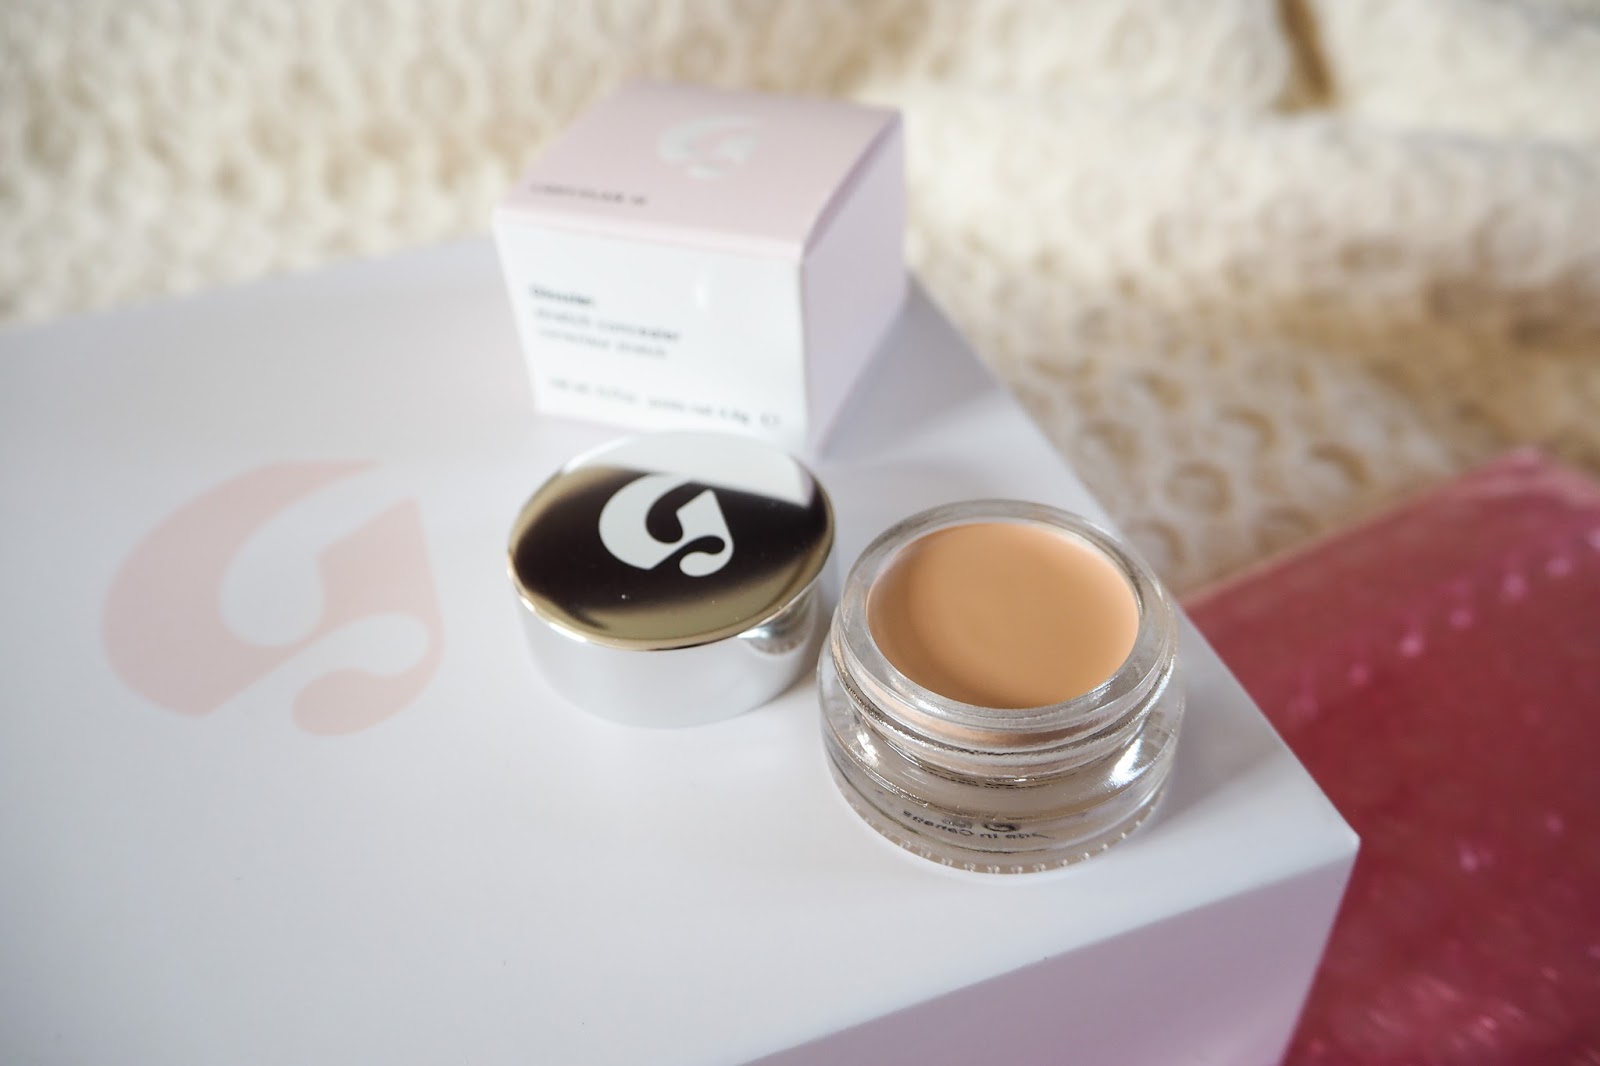 Glossier Stretch Concealer in Light